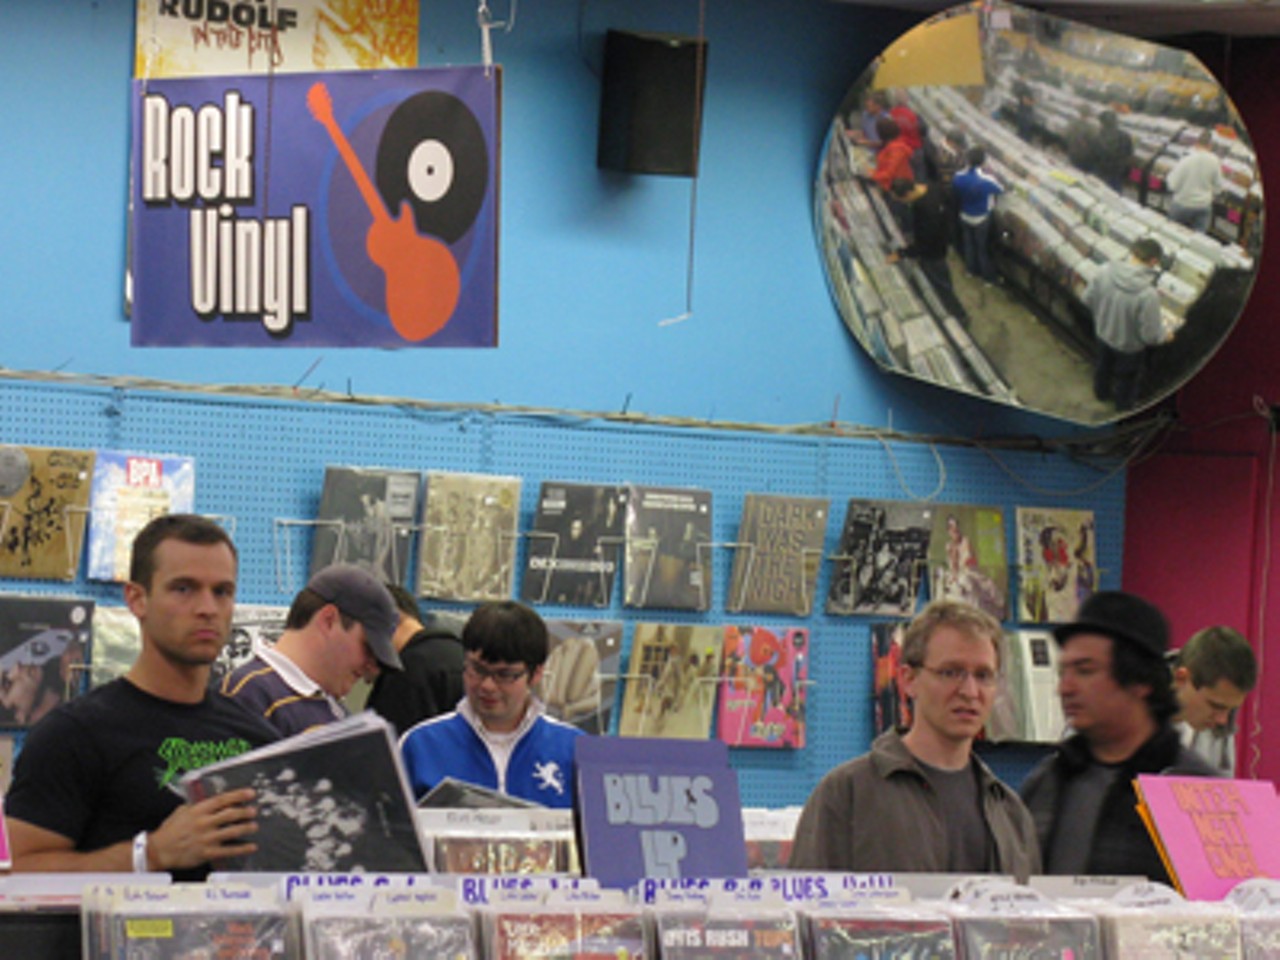 Like Euclid, Vintage Vinyl was also busy with customers -- so much so that the store ran out of free PBR early in the day.